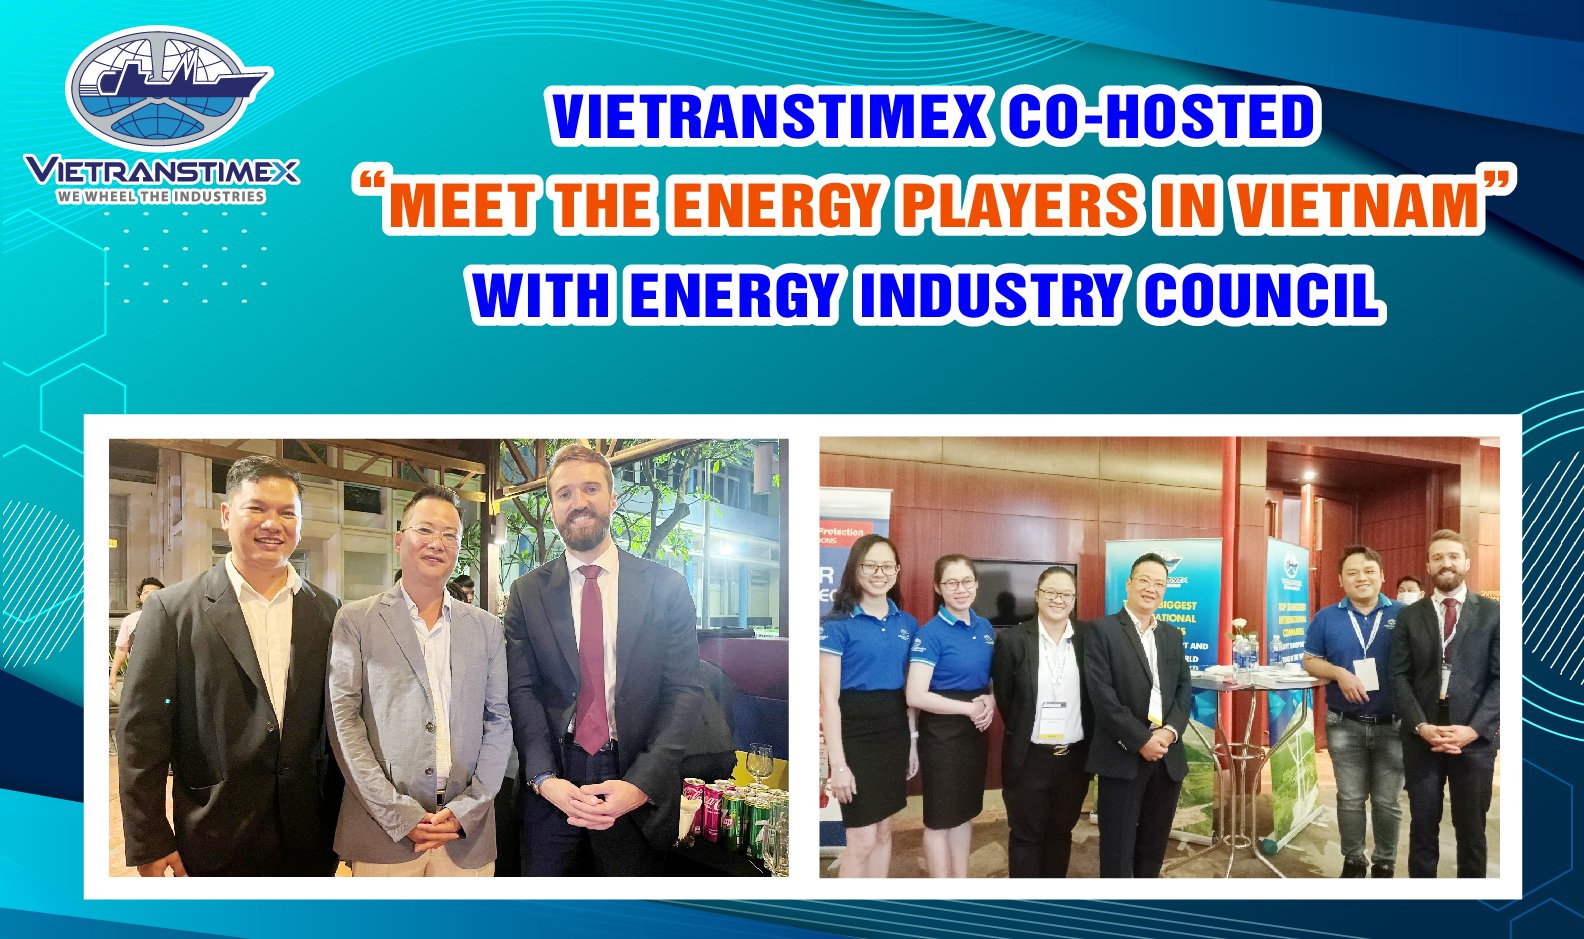 Vietranstimex co-hosted “Meet the Energy Players In Vietnam” with Energy Industry Council